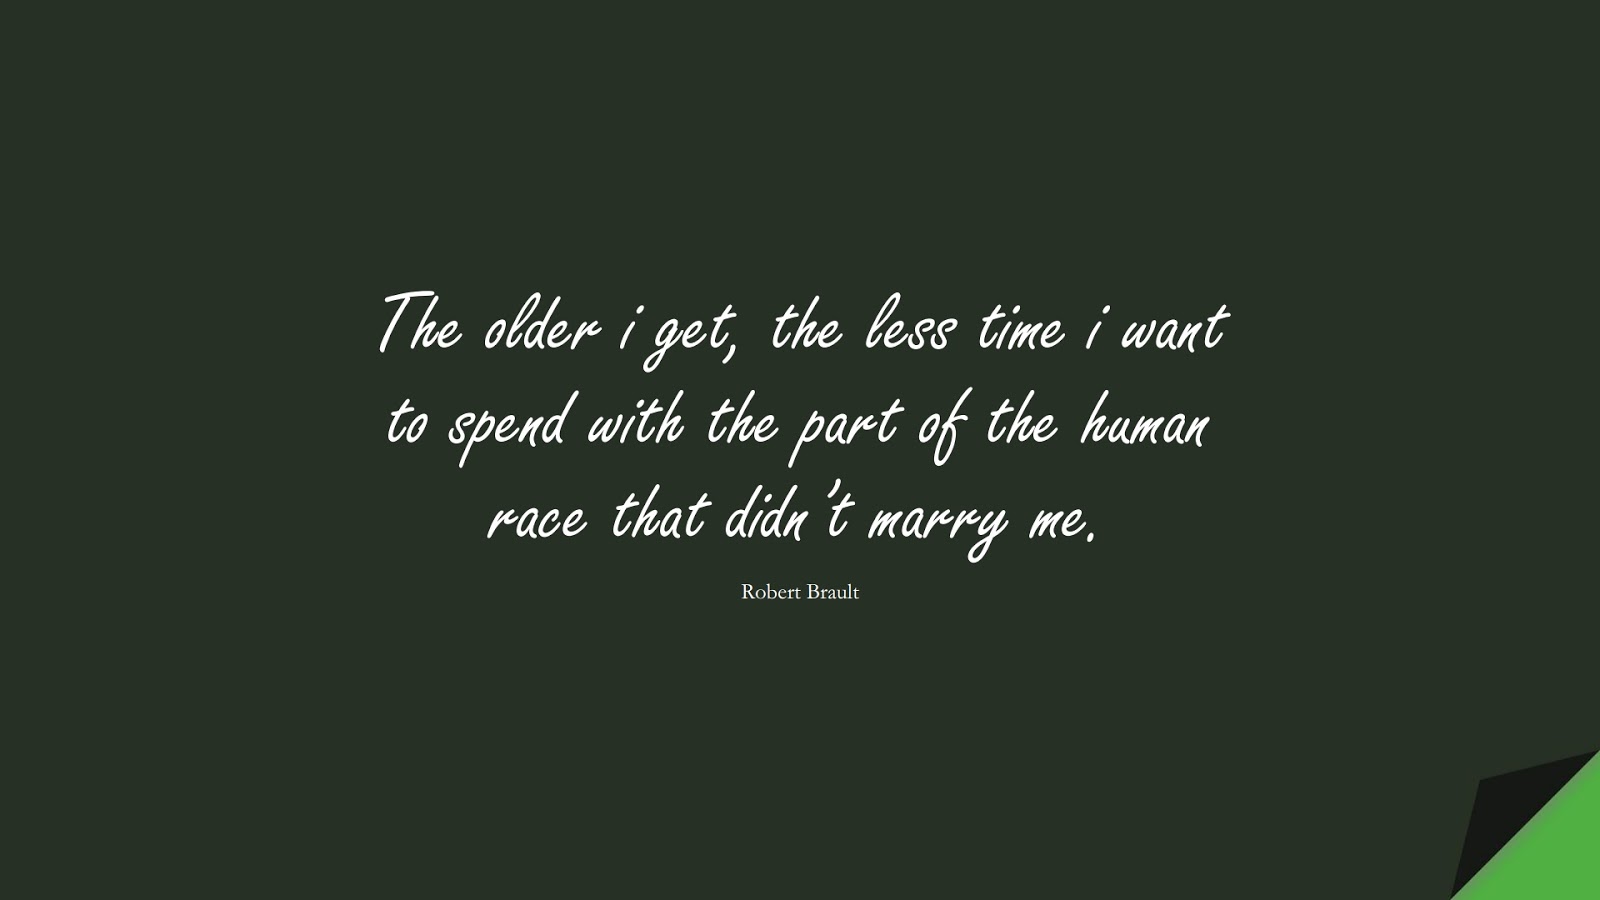 The older i get, the less time i want to spend with the part of the human race that didn’t marry me. (Robert Brault);  #RelationshipQuotes